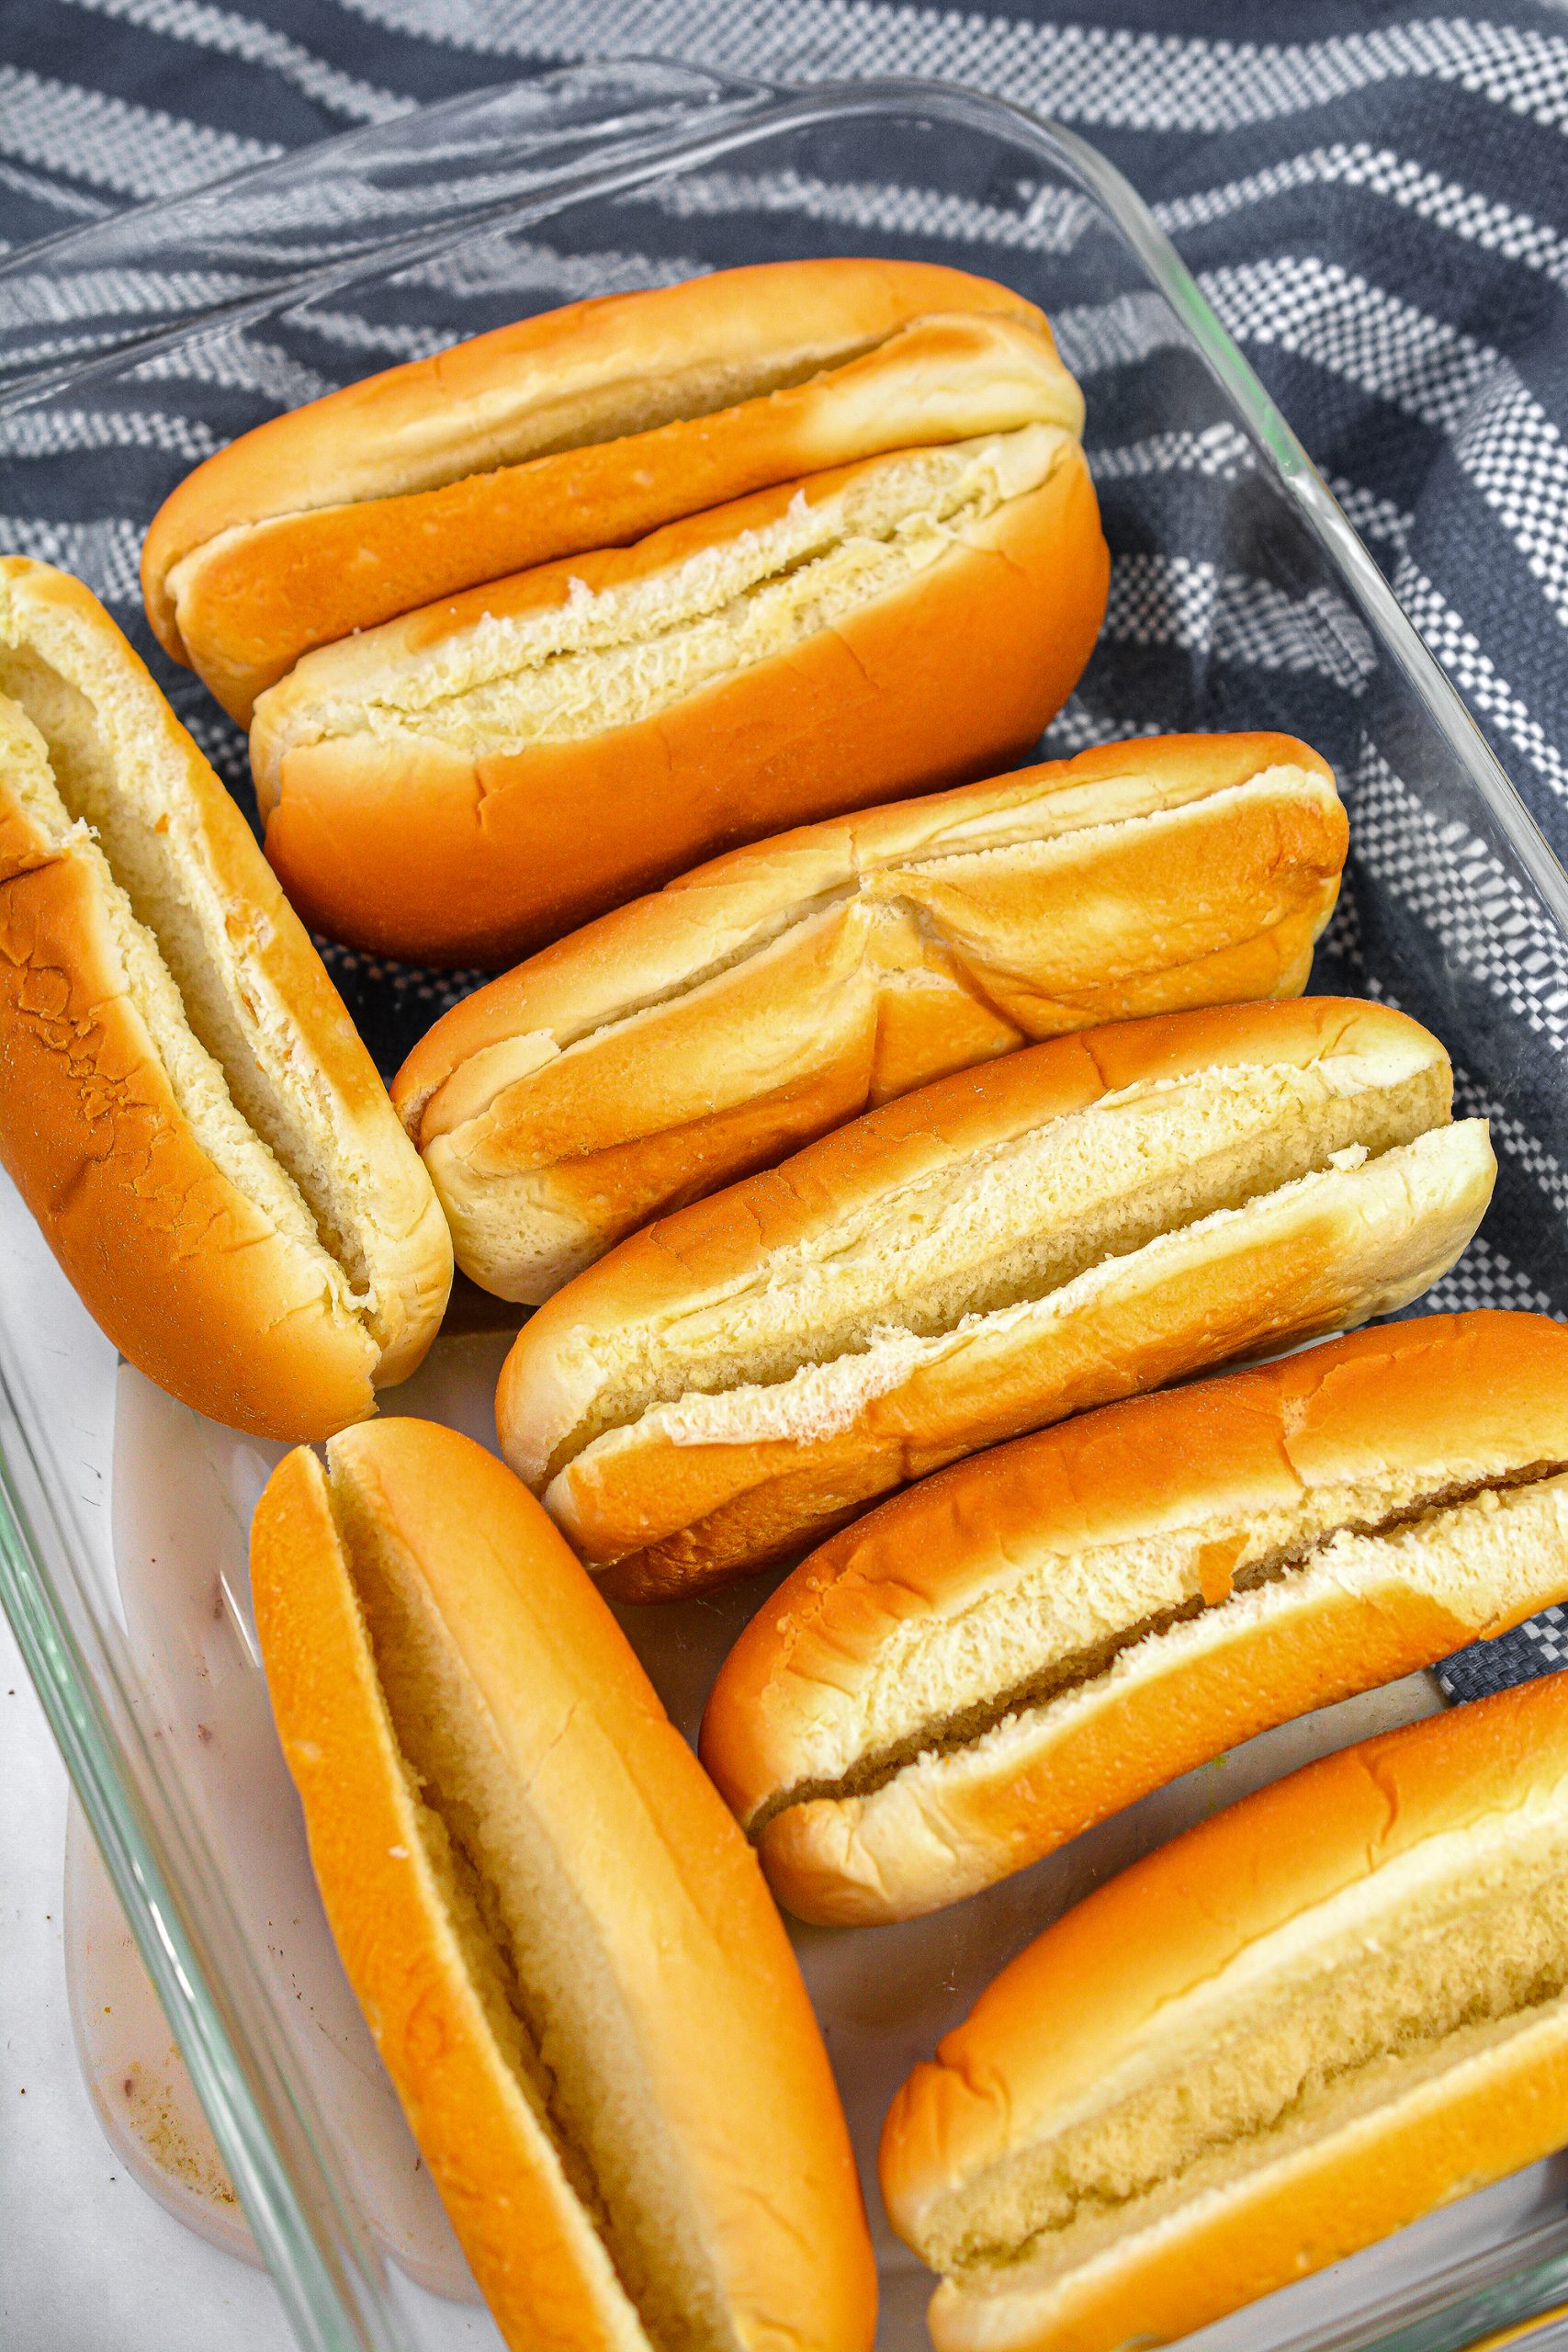 Place the hot dog buns in a single layer in a 9x13 baking dish.